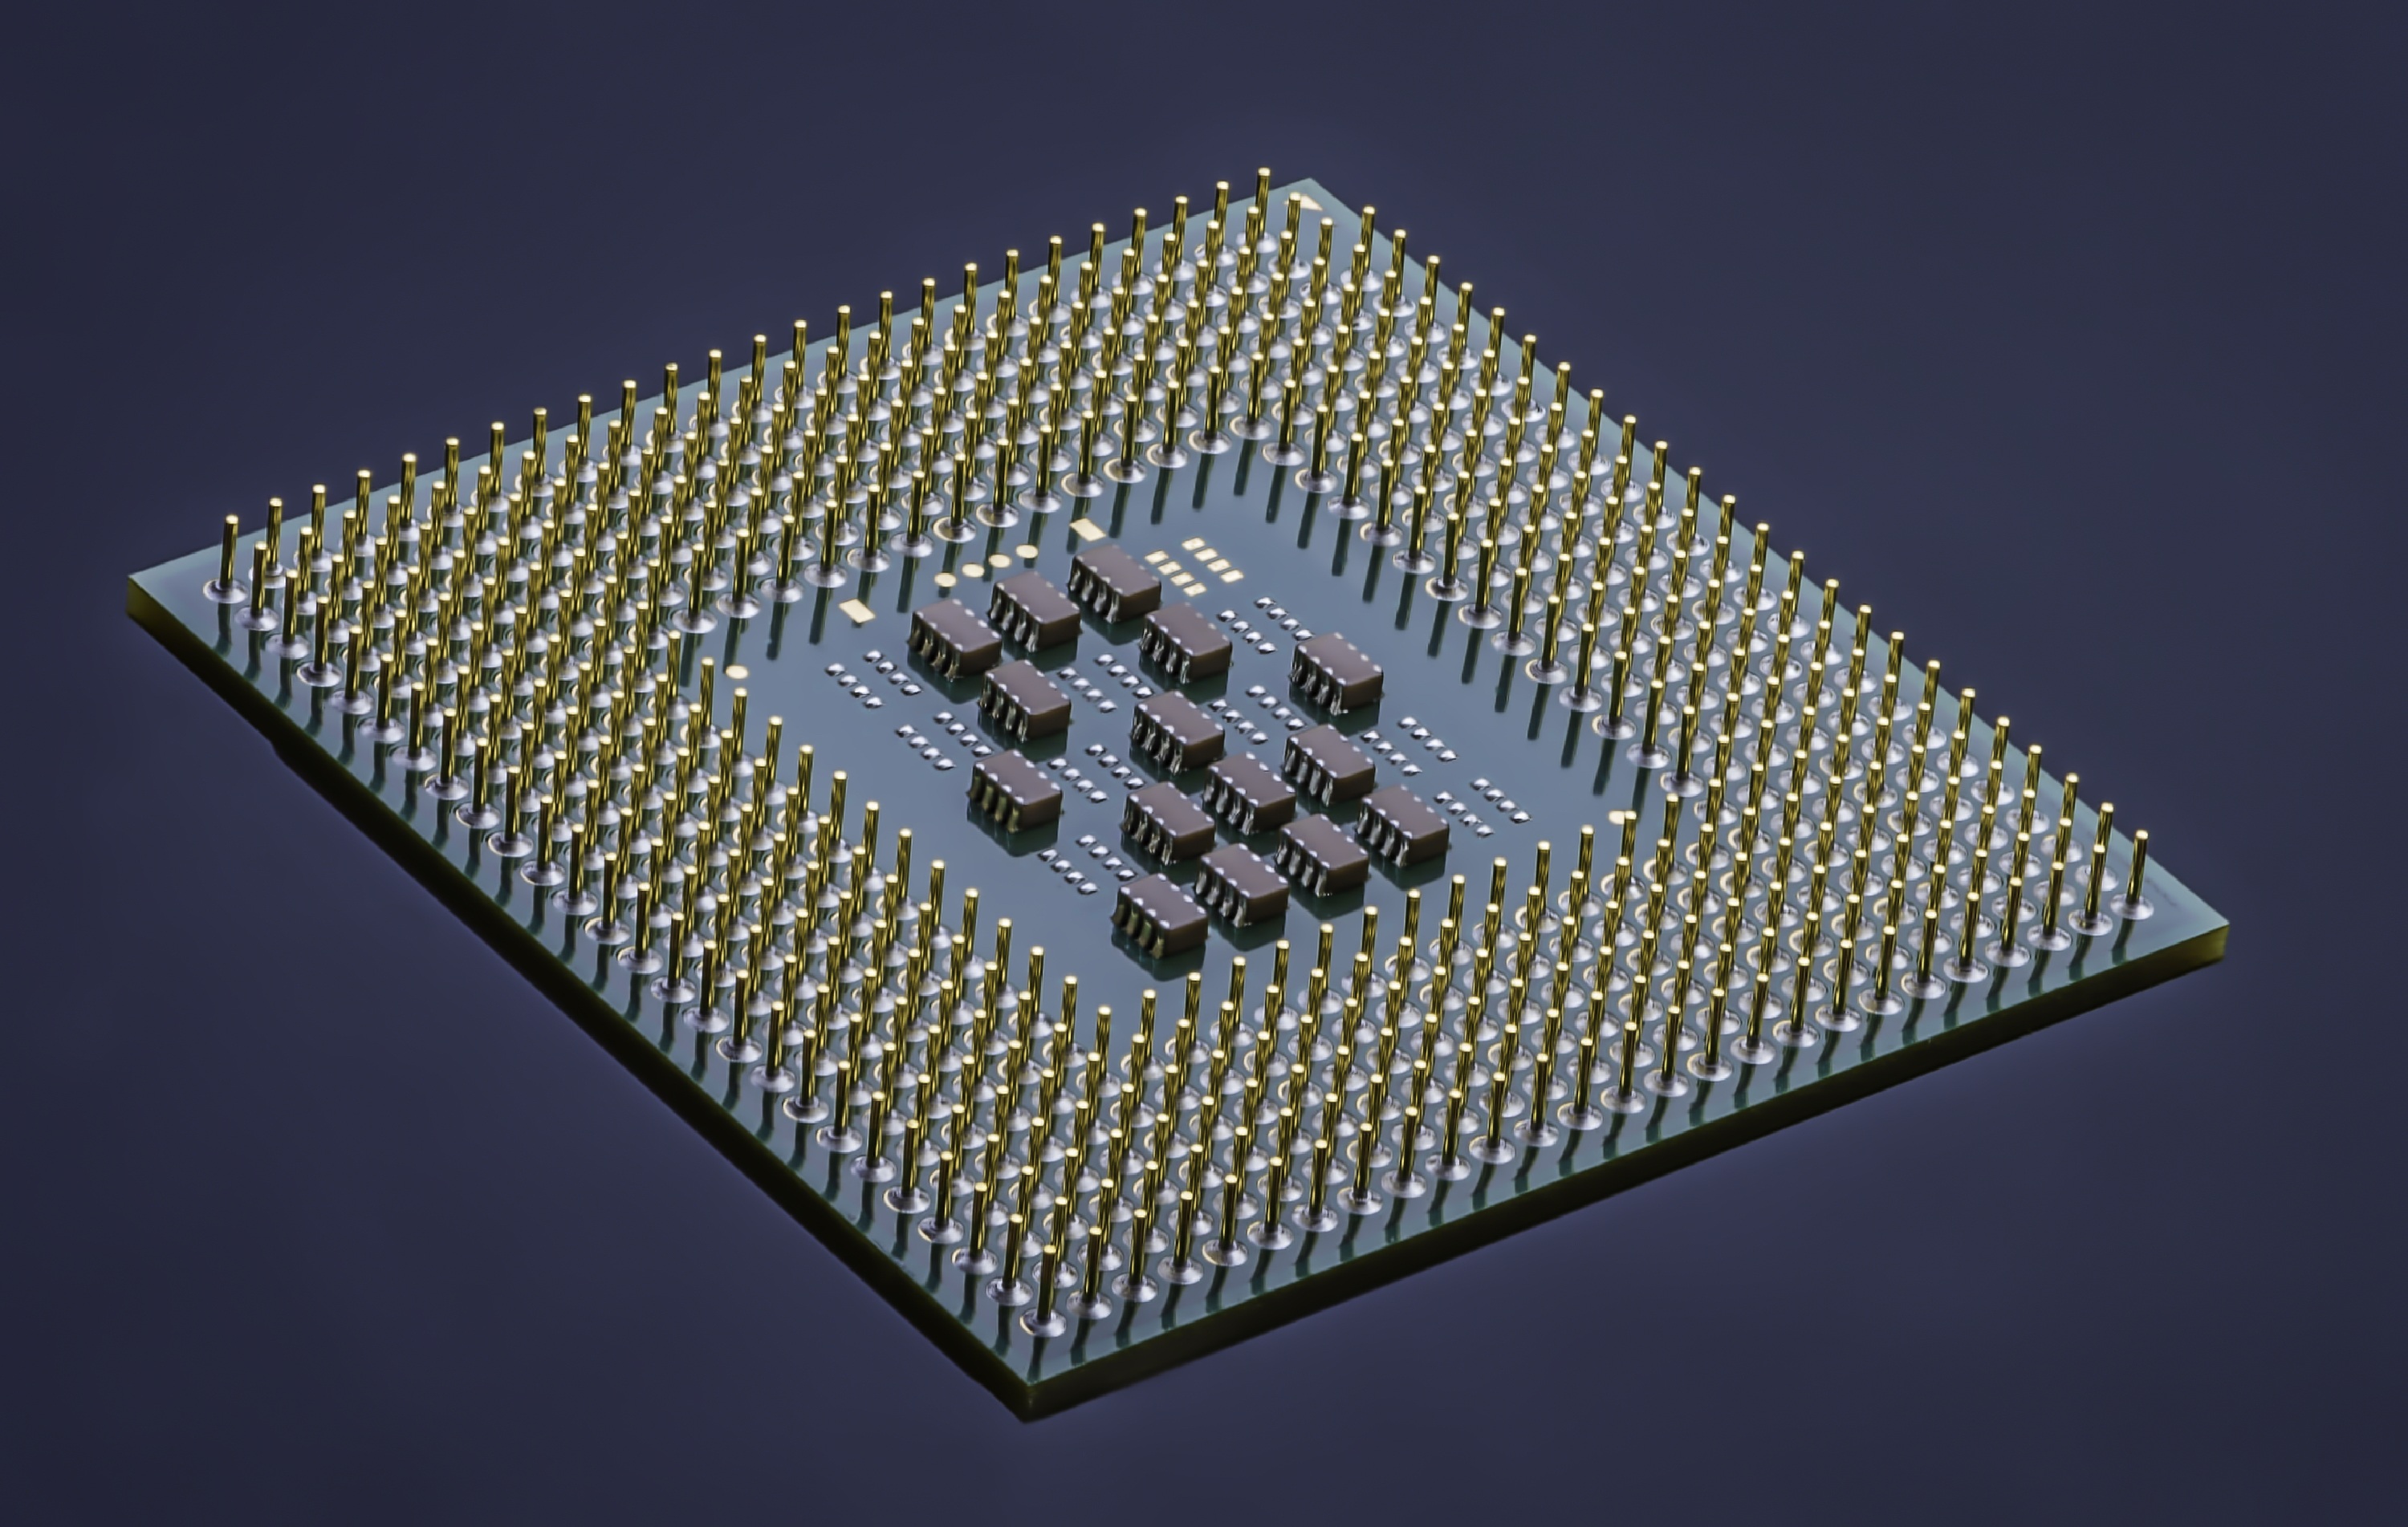 Semiconductor Wallpaper, HD Semiconductor Background, Free Image Download